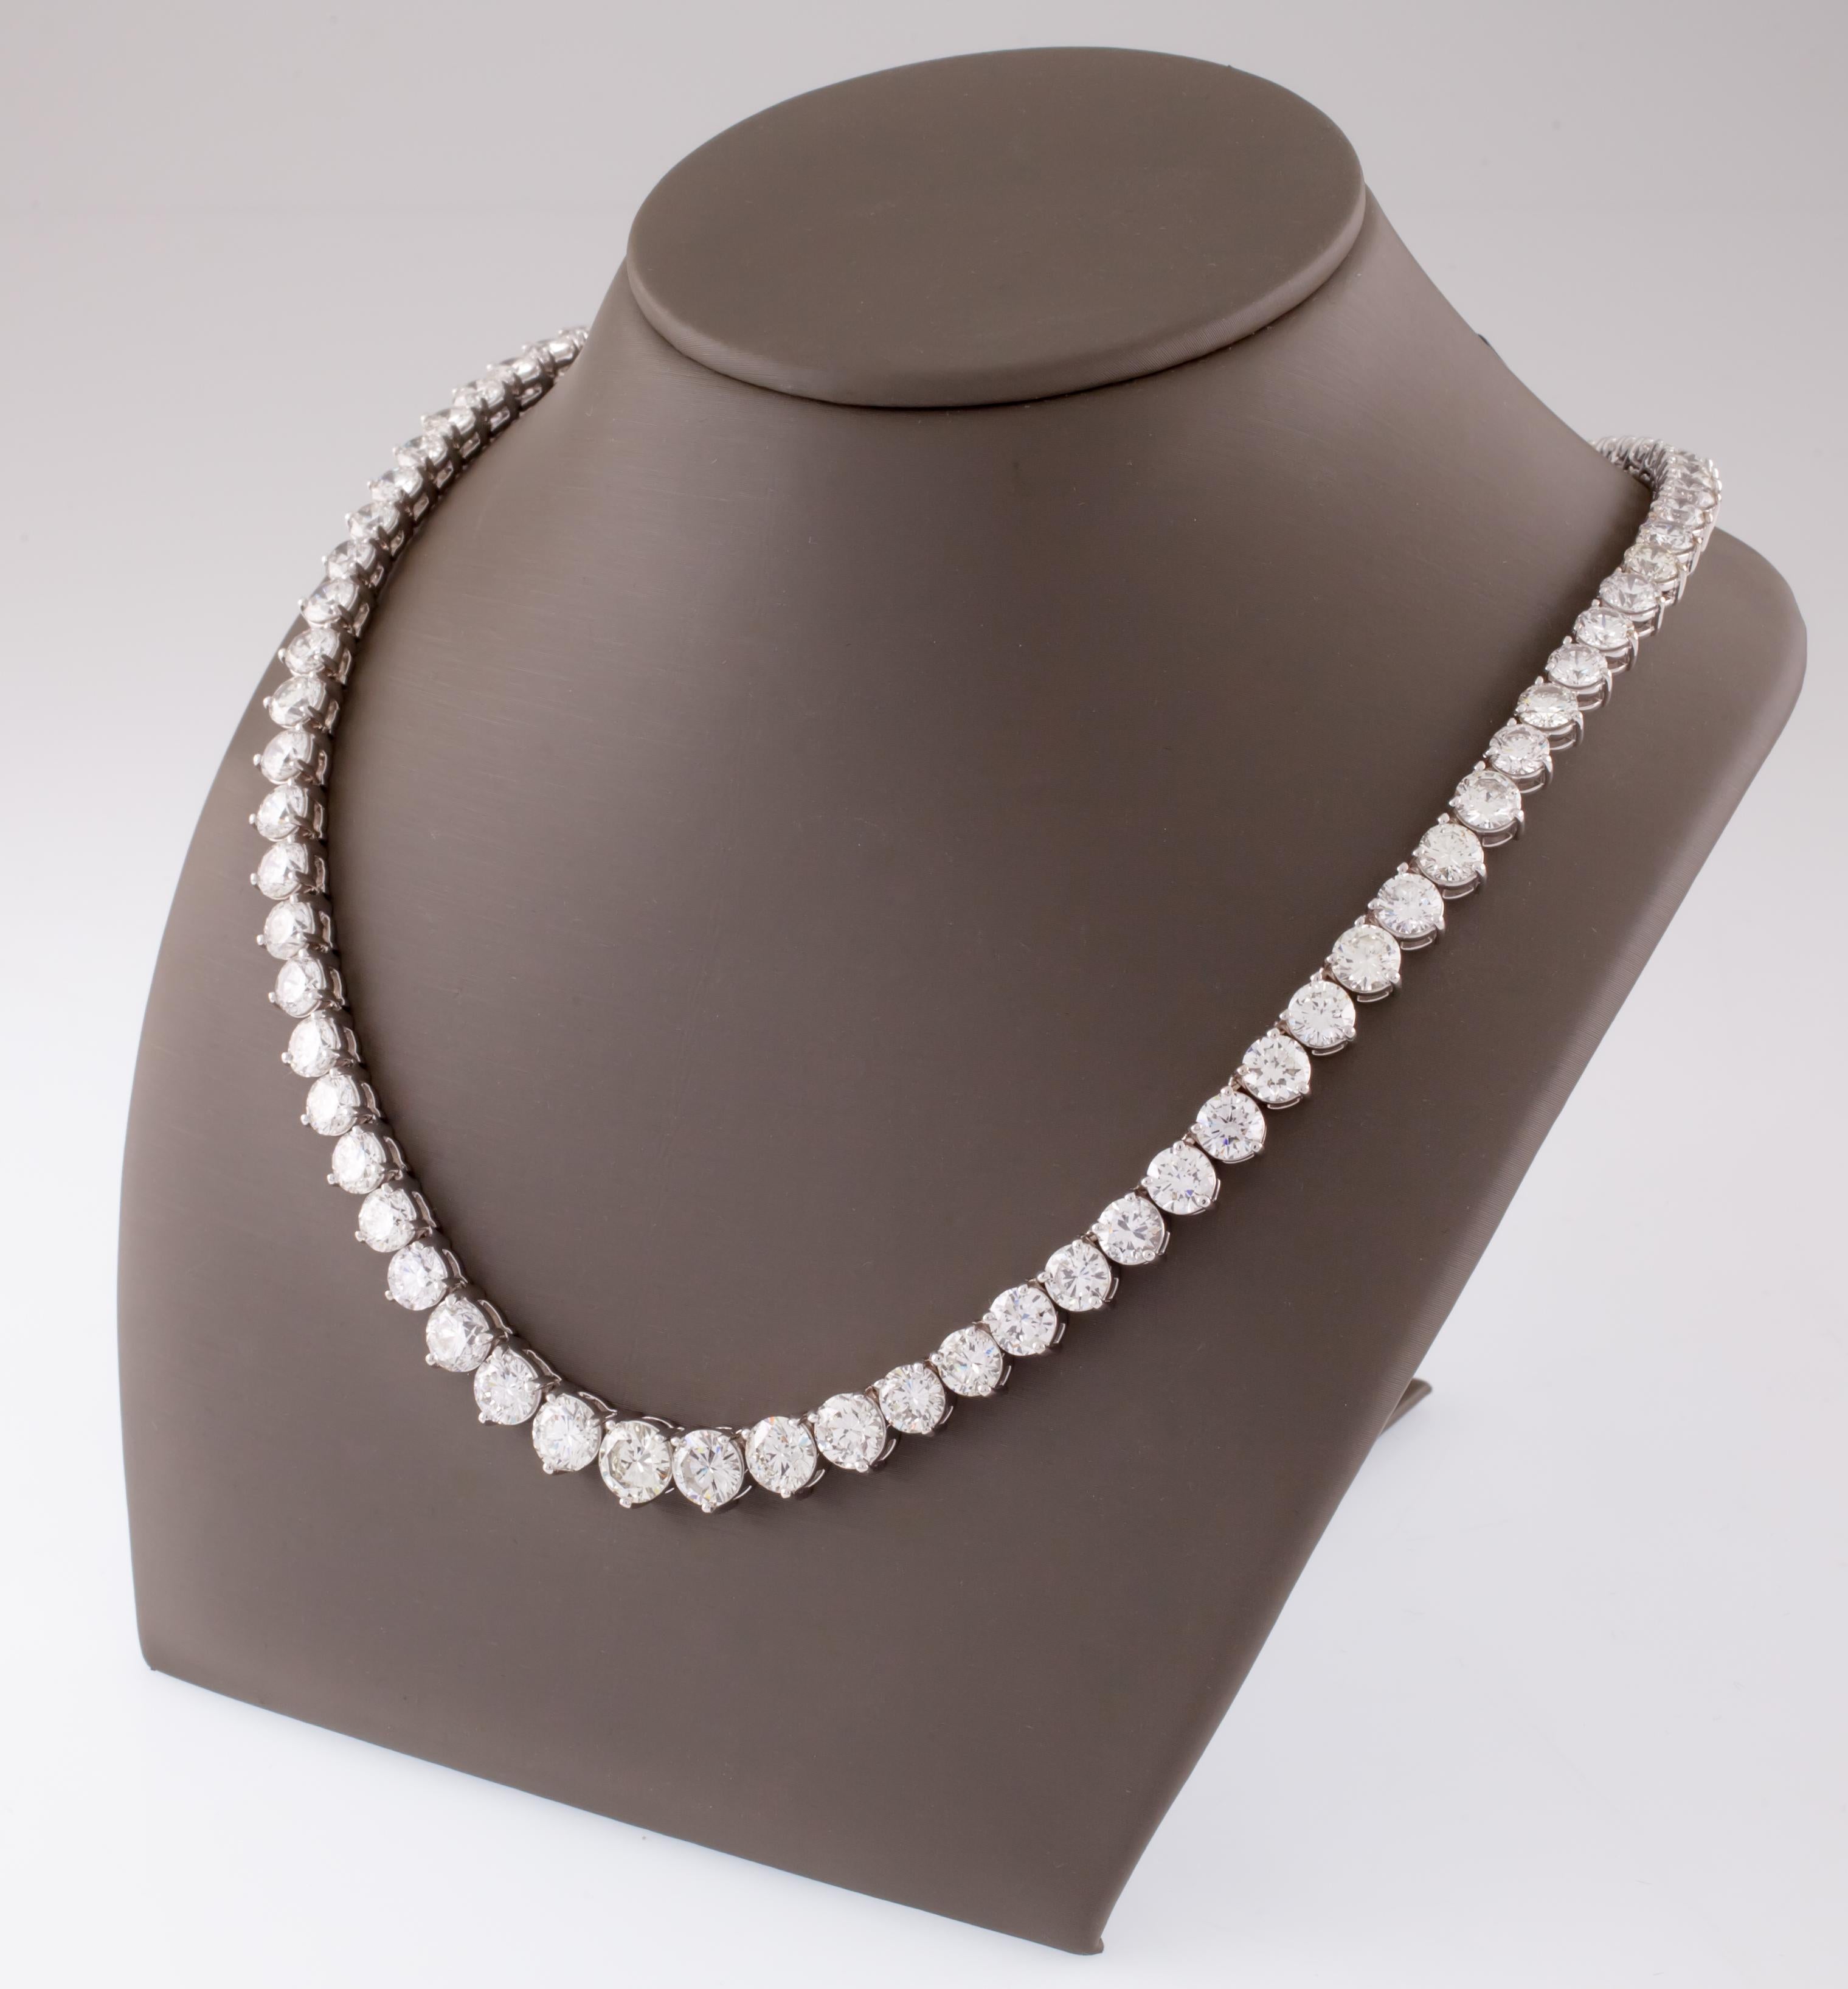 Gorgeous Tennis Necklace
3-Prong Settings for Each Stone
Stones in Graduated Series with Largest Stone in Center
Total Diamond Weight = 43.19 ct
Average Color = I - J
Average Clarity = VS - SI
Total Number of Stones = 81 stones
Total Length =